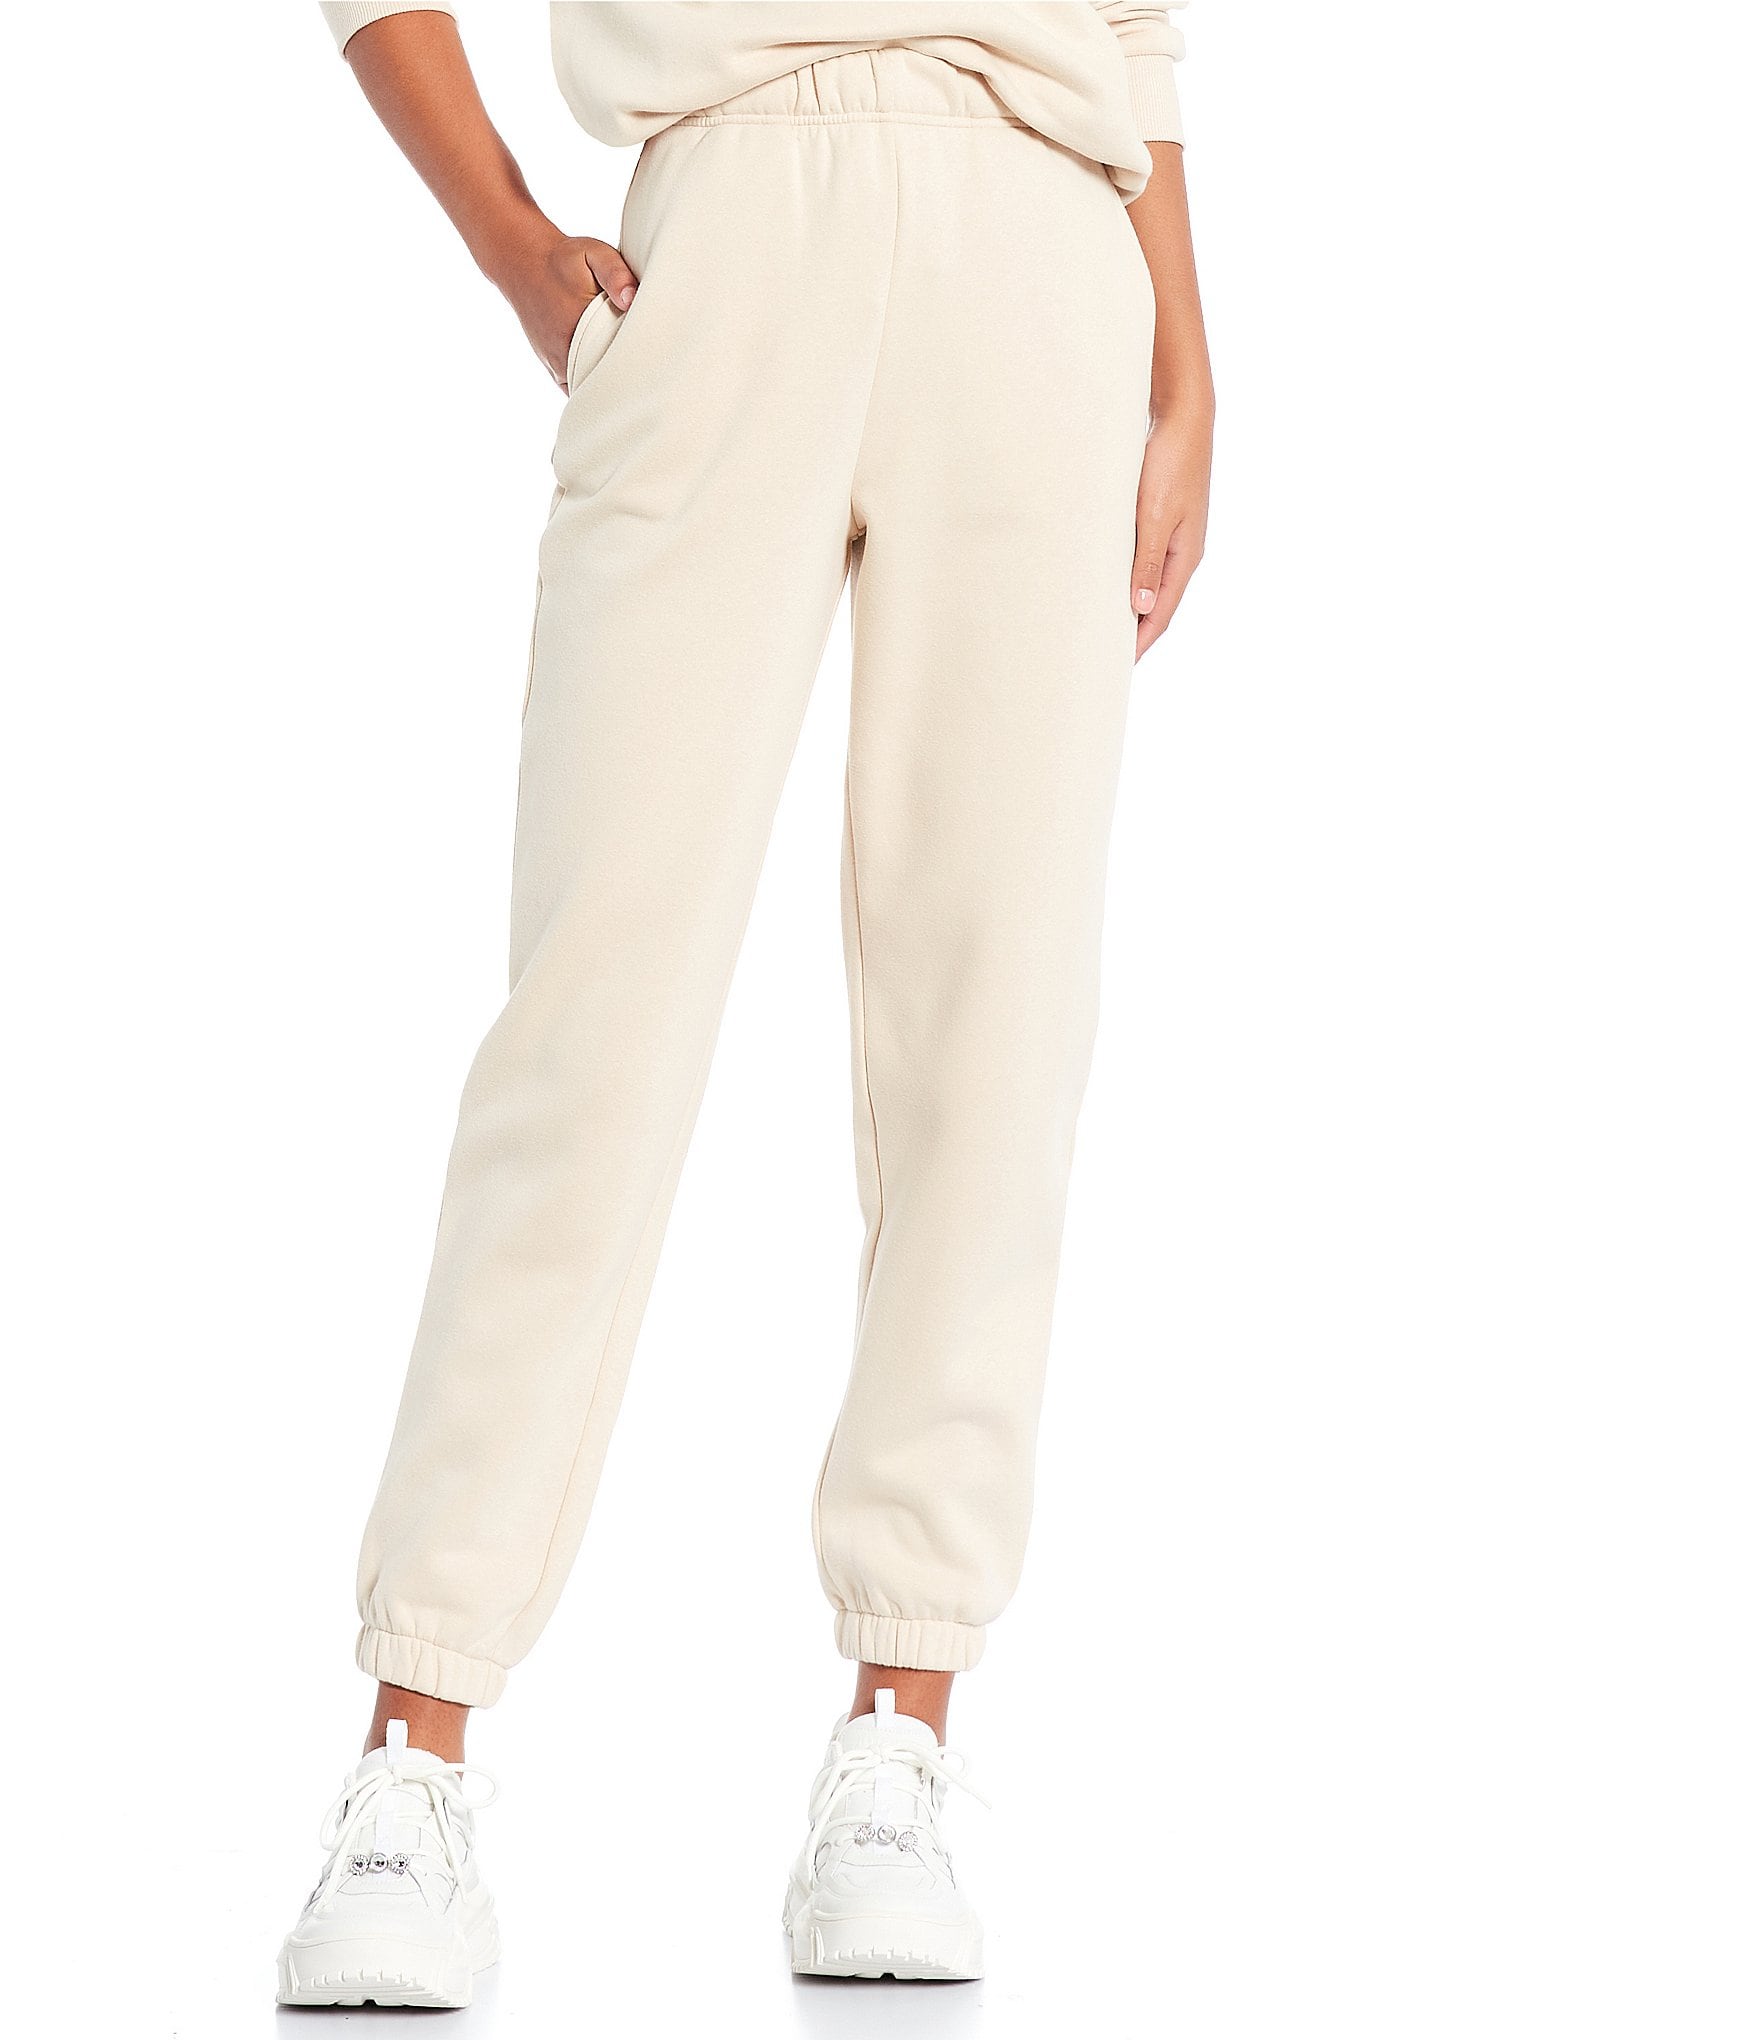 Andrew Marc Sport Satin High Waist Cinched Cuff Pull-On Cargo Joggers